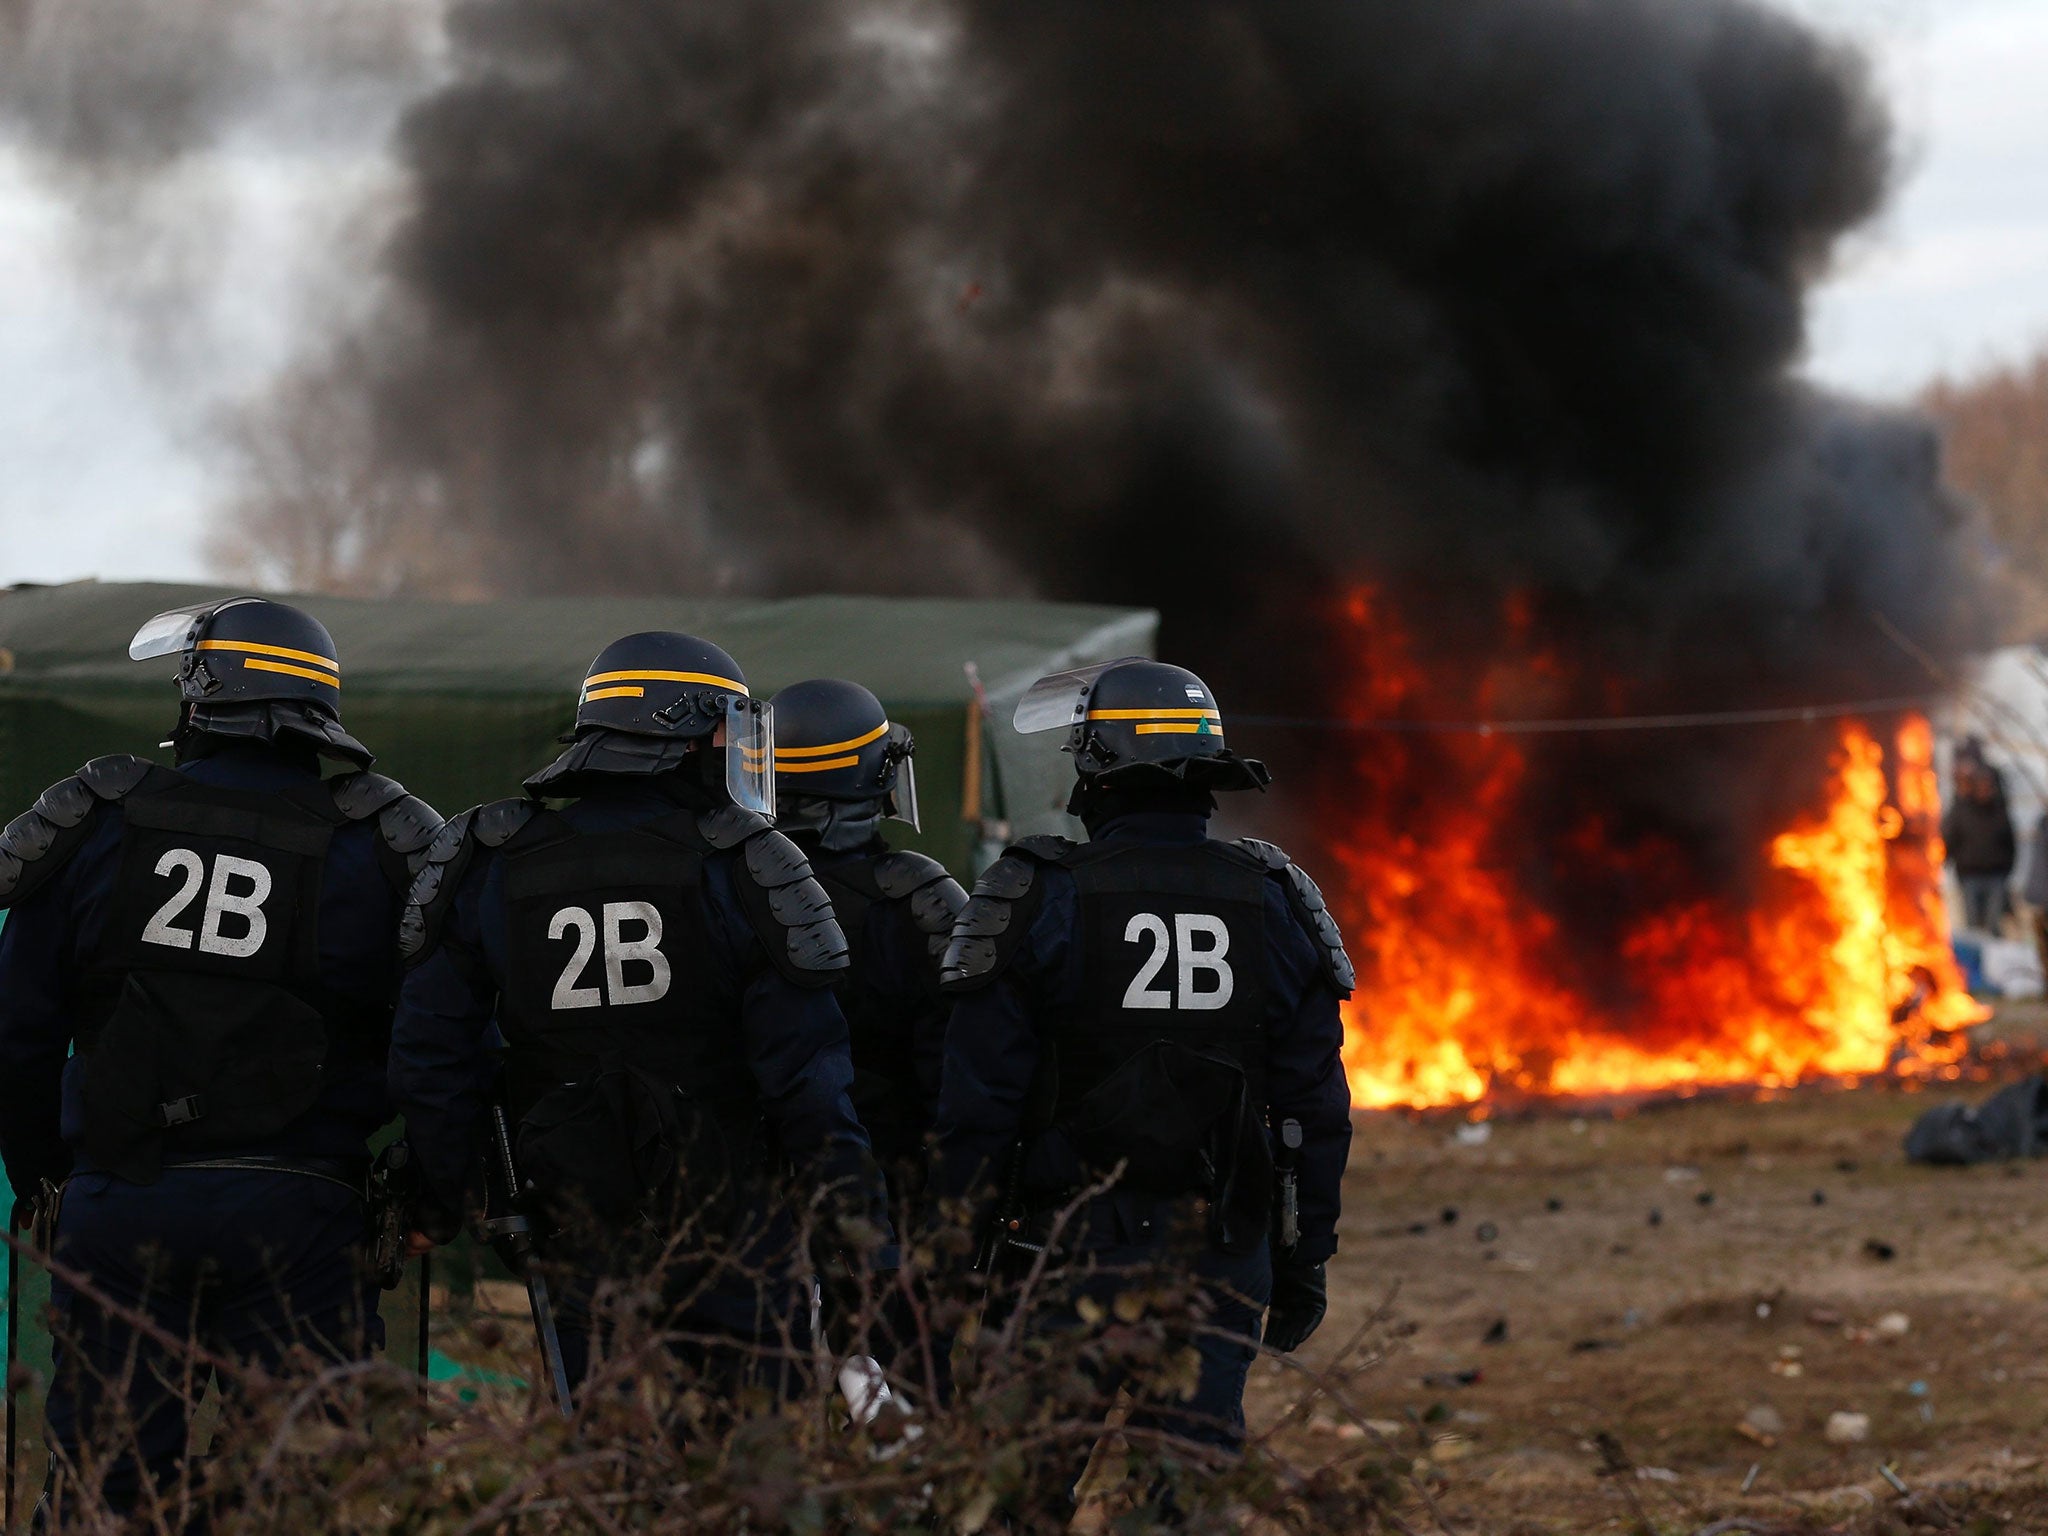 French riot police in front of a burning shelter at the start of the demolition of a part of the Jungle migrant camp in Calais, France, 29 February 2016.